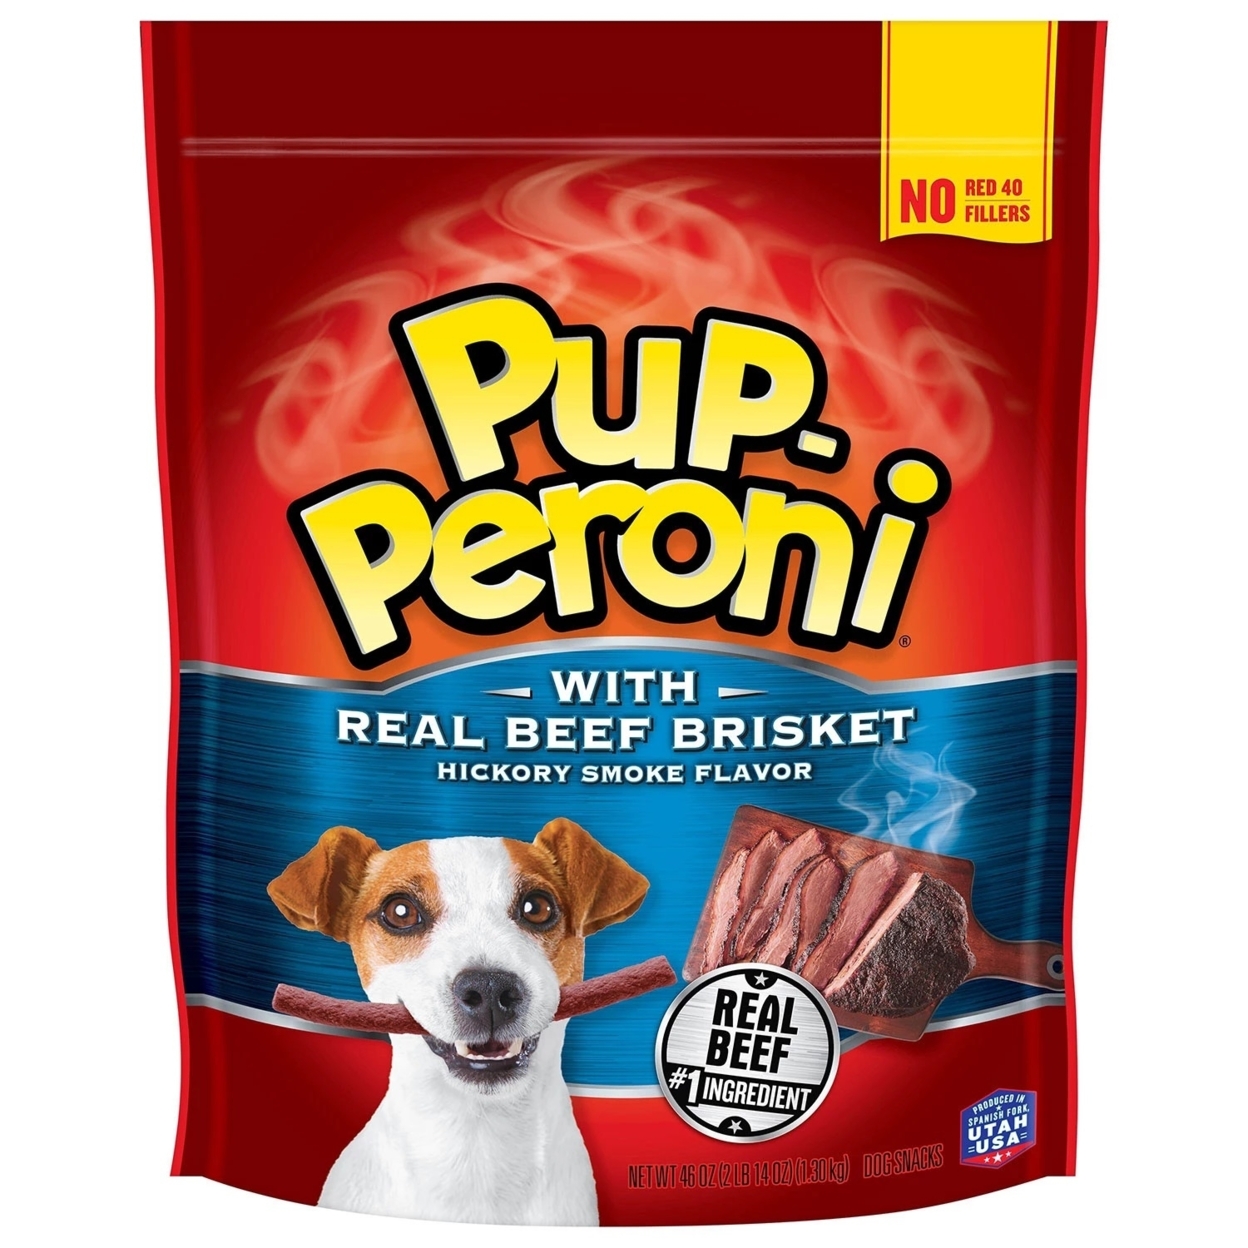 Pup-Peroni Dog Treats With Real Beef Brisket, Hickory Smoked Flavor (46 Ounce)